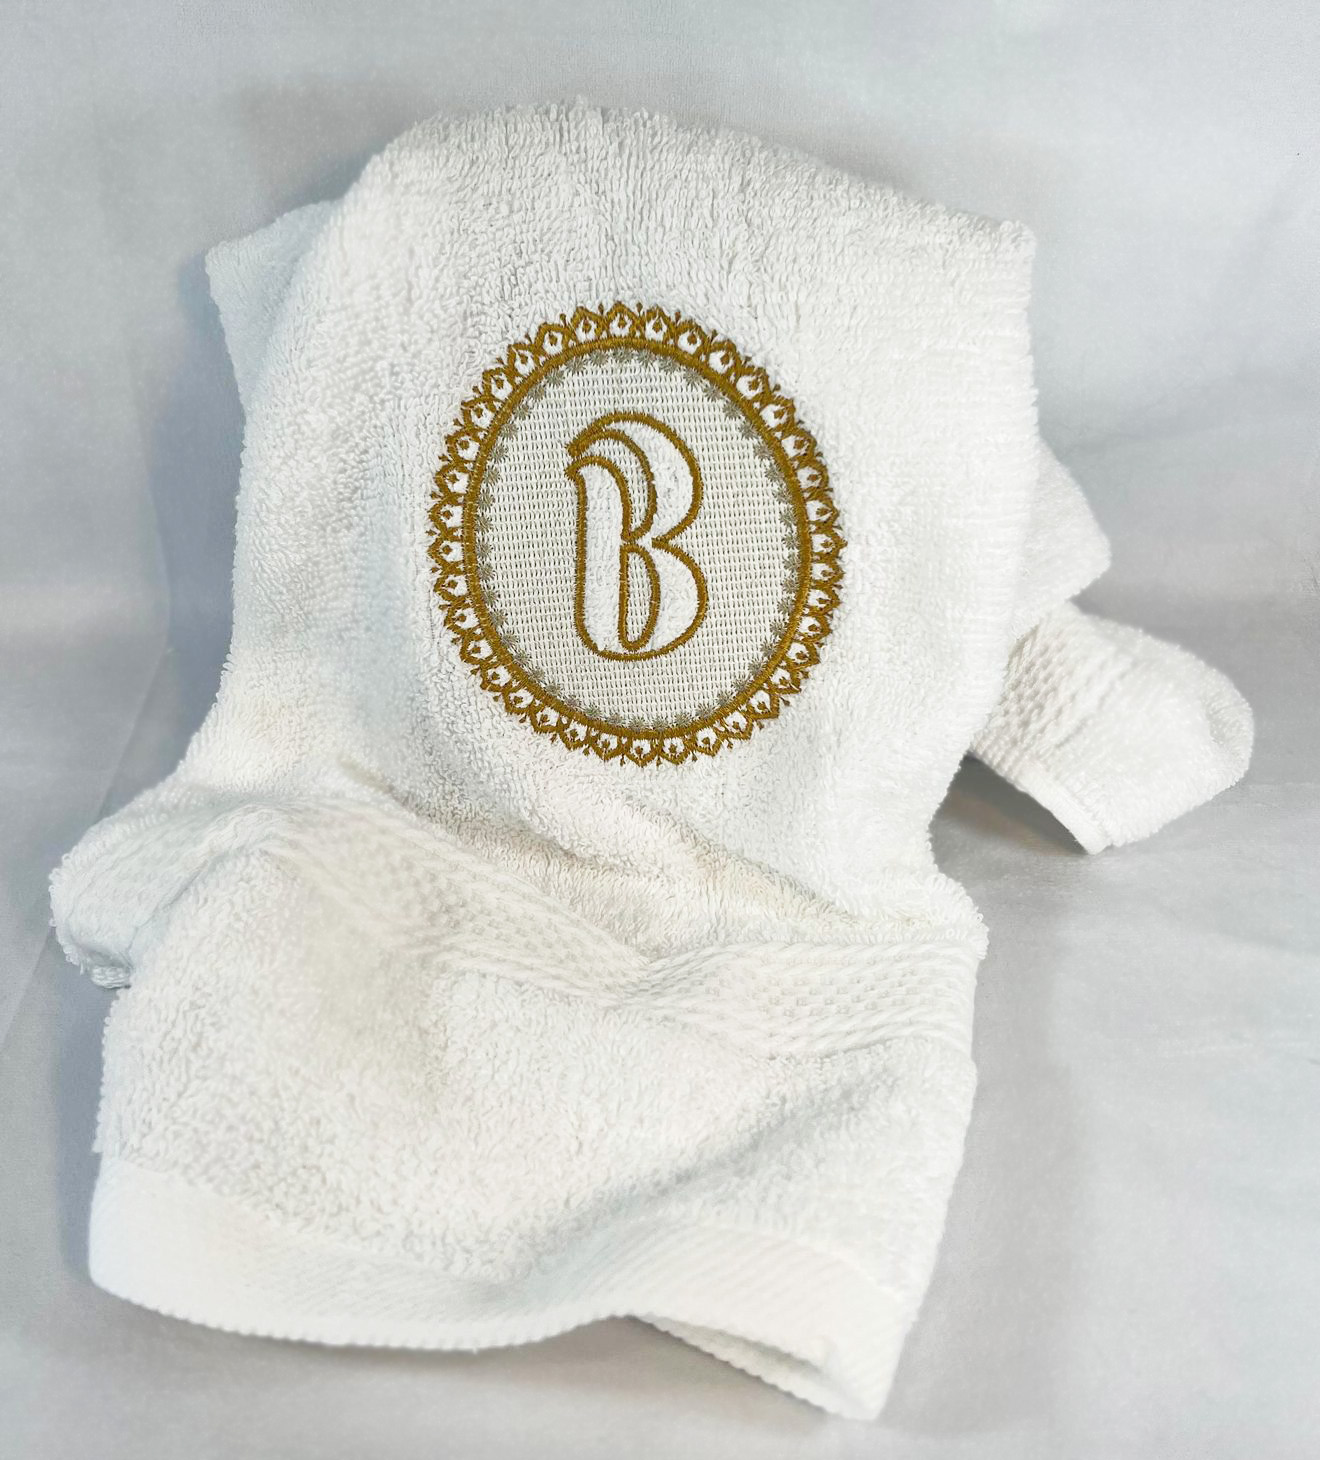 personalized towels